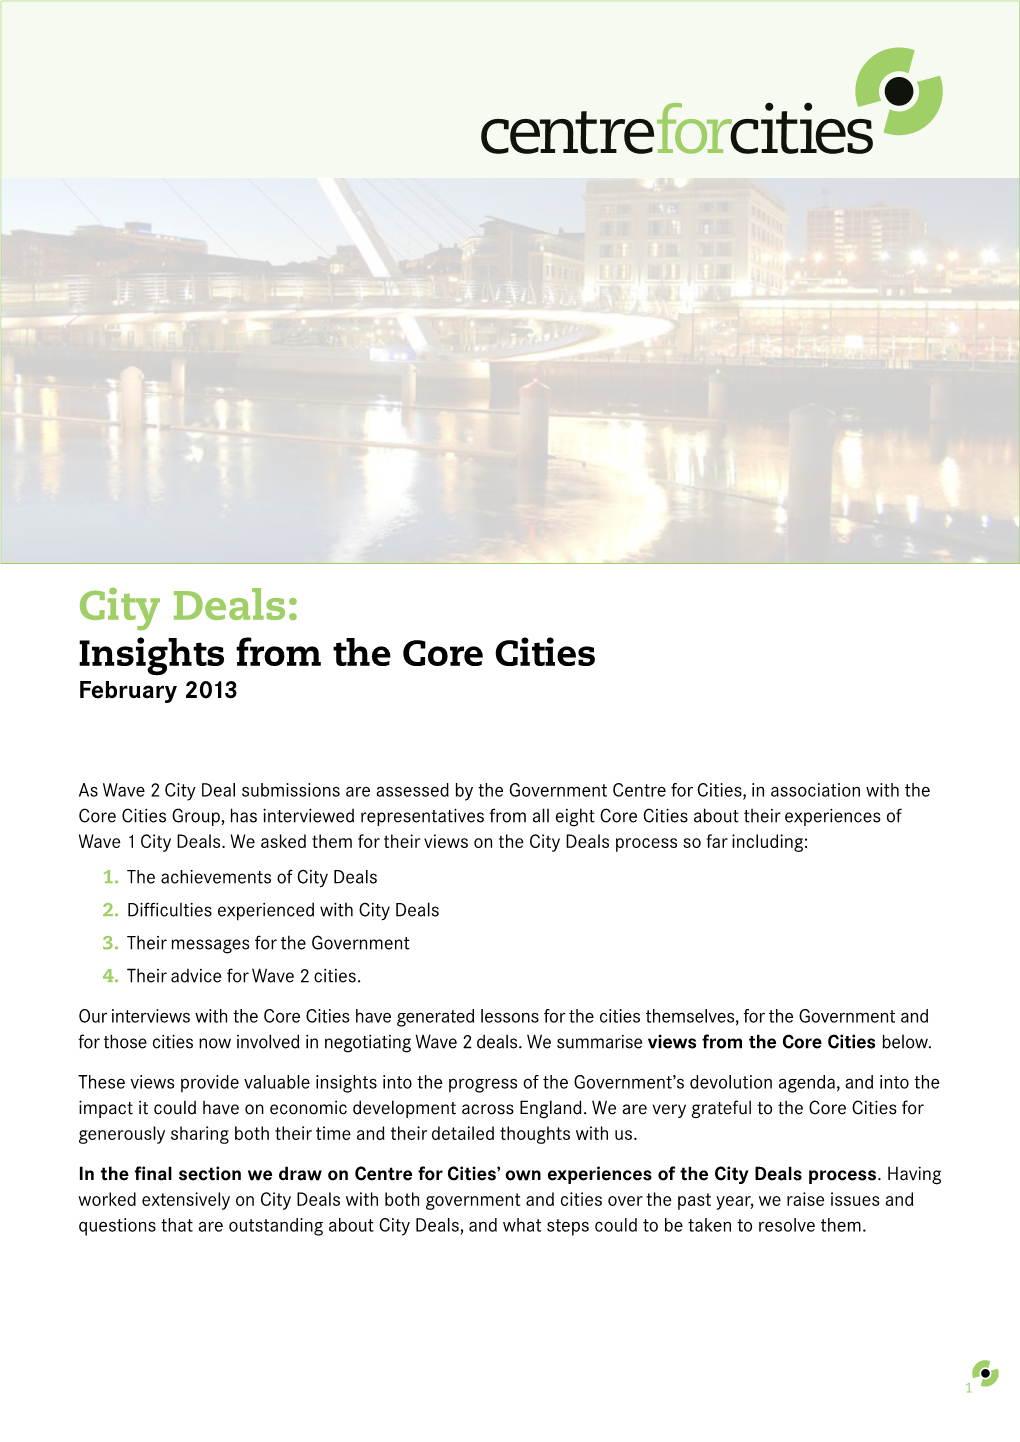 City Deals: Insights from the Core Cities February 2013